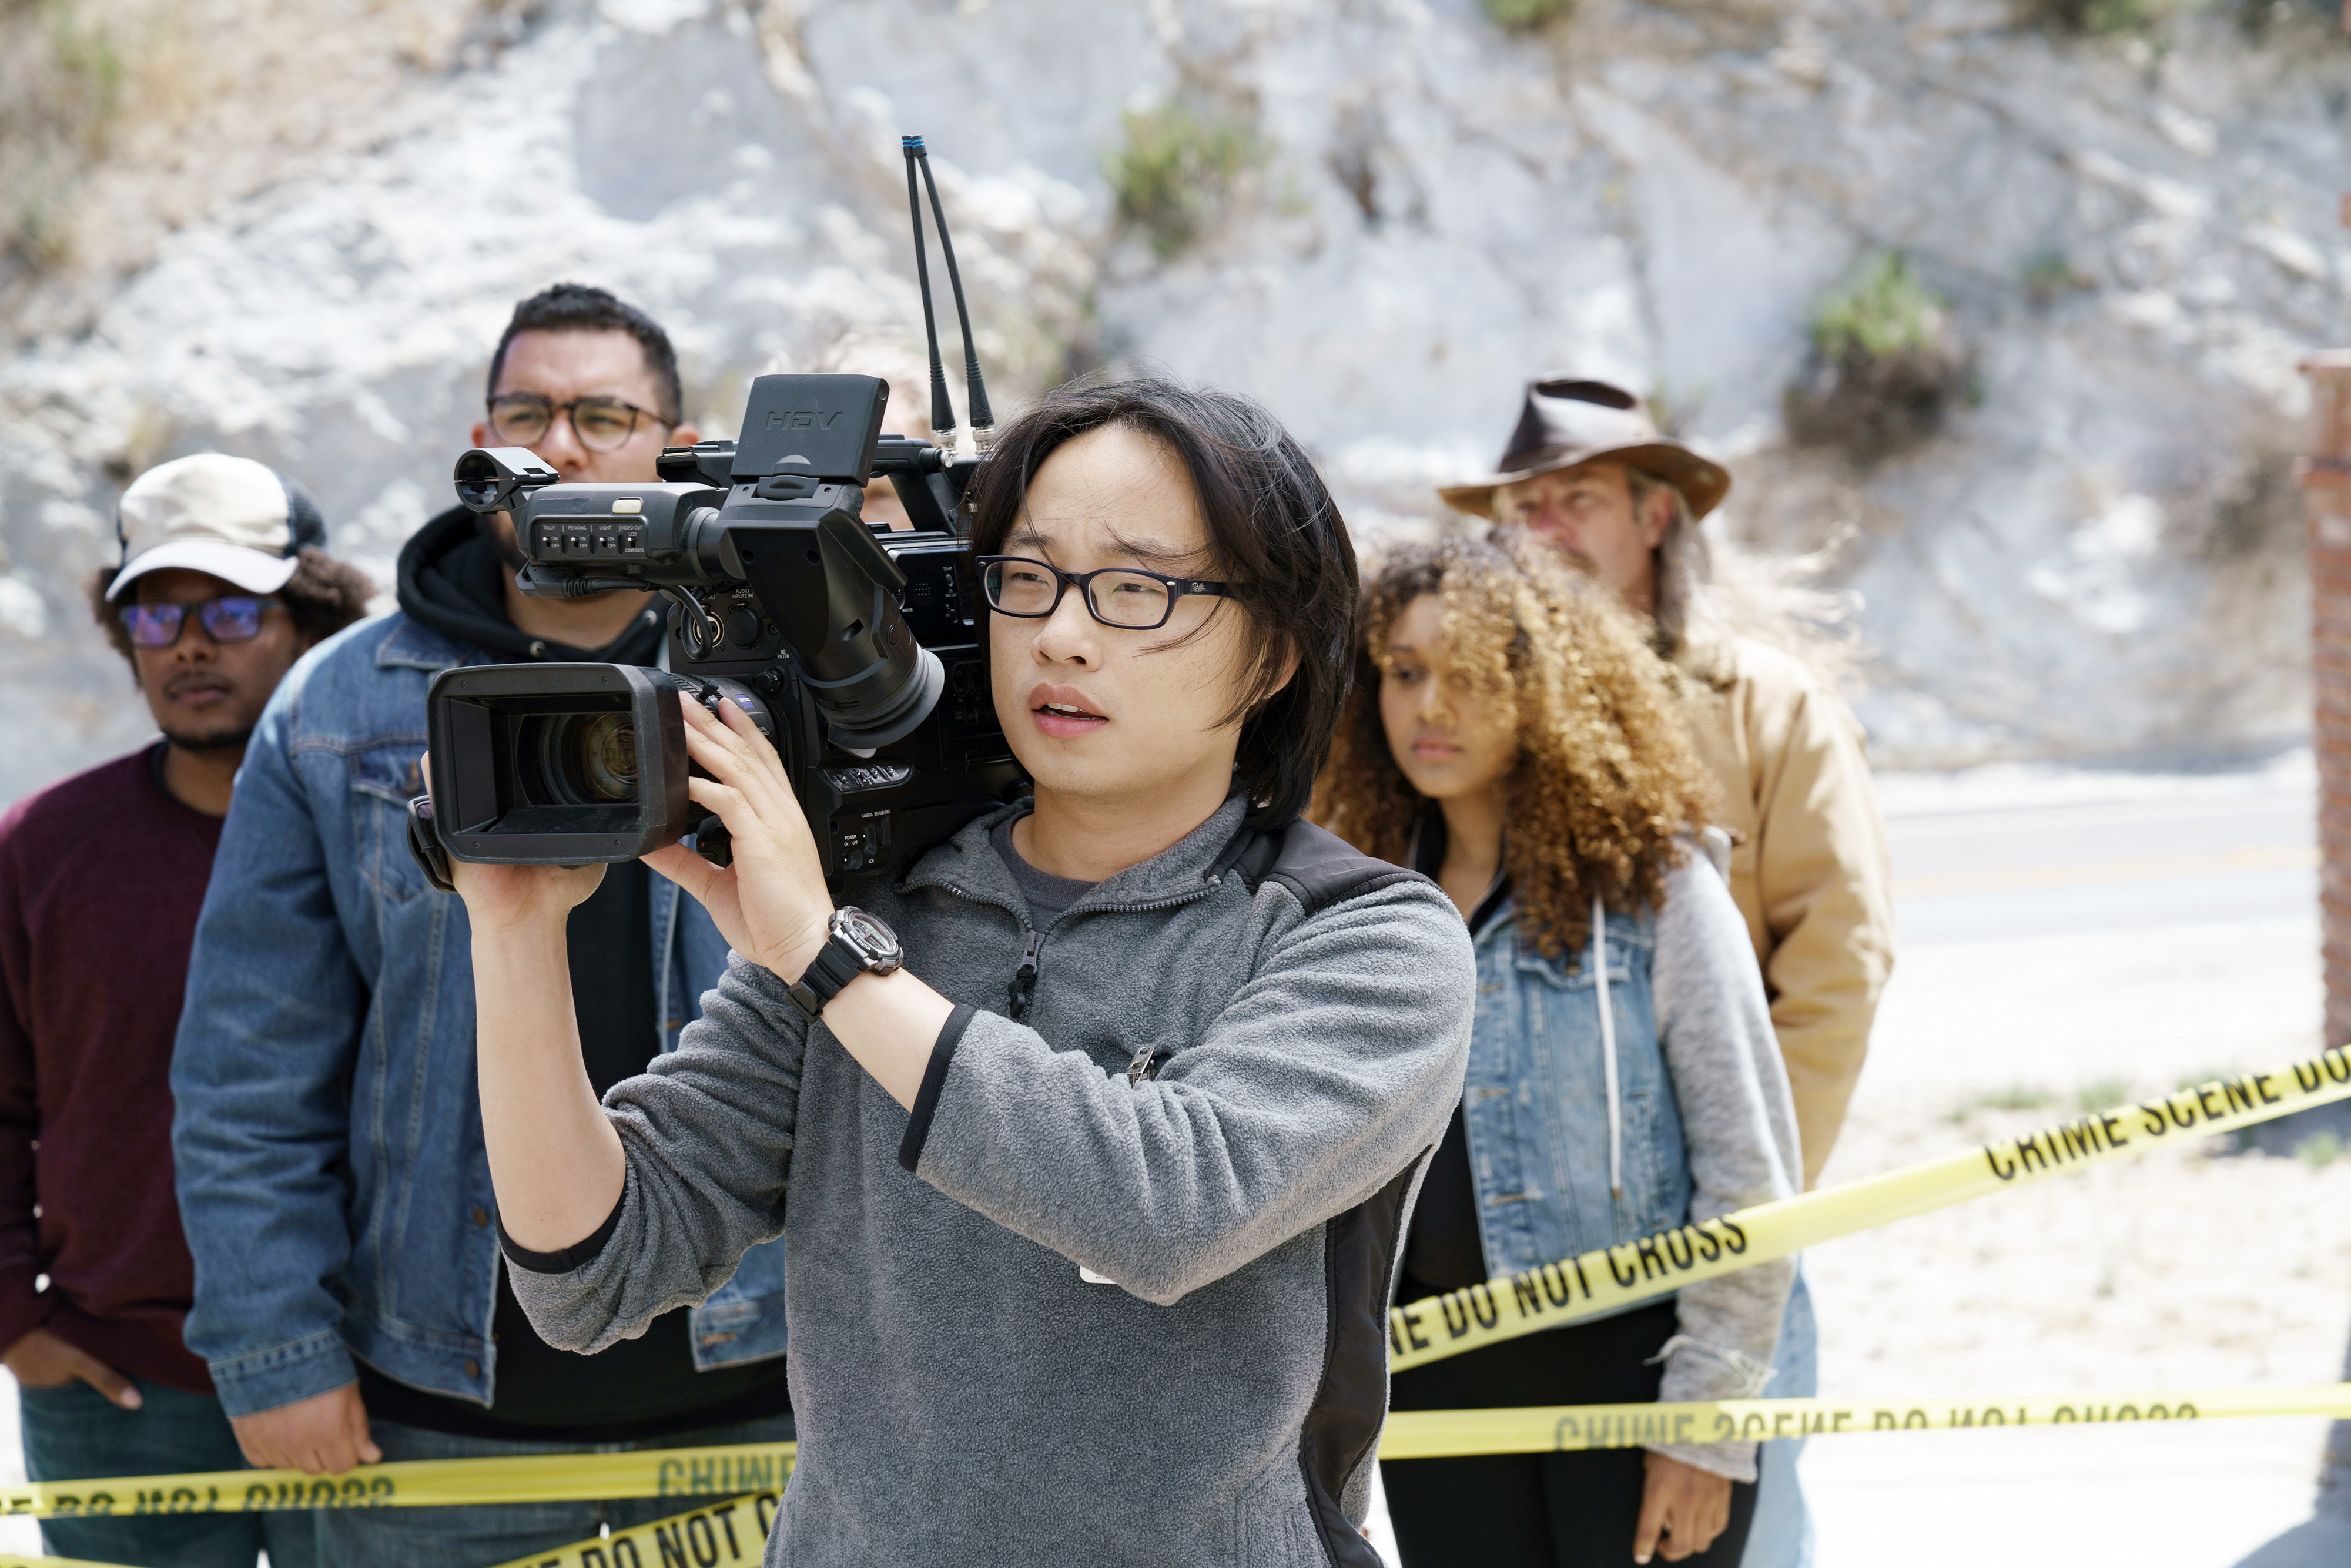 Jimmy O. Yang holding a video camera with others in the background behind yellow caution tape